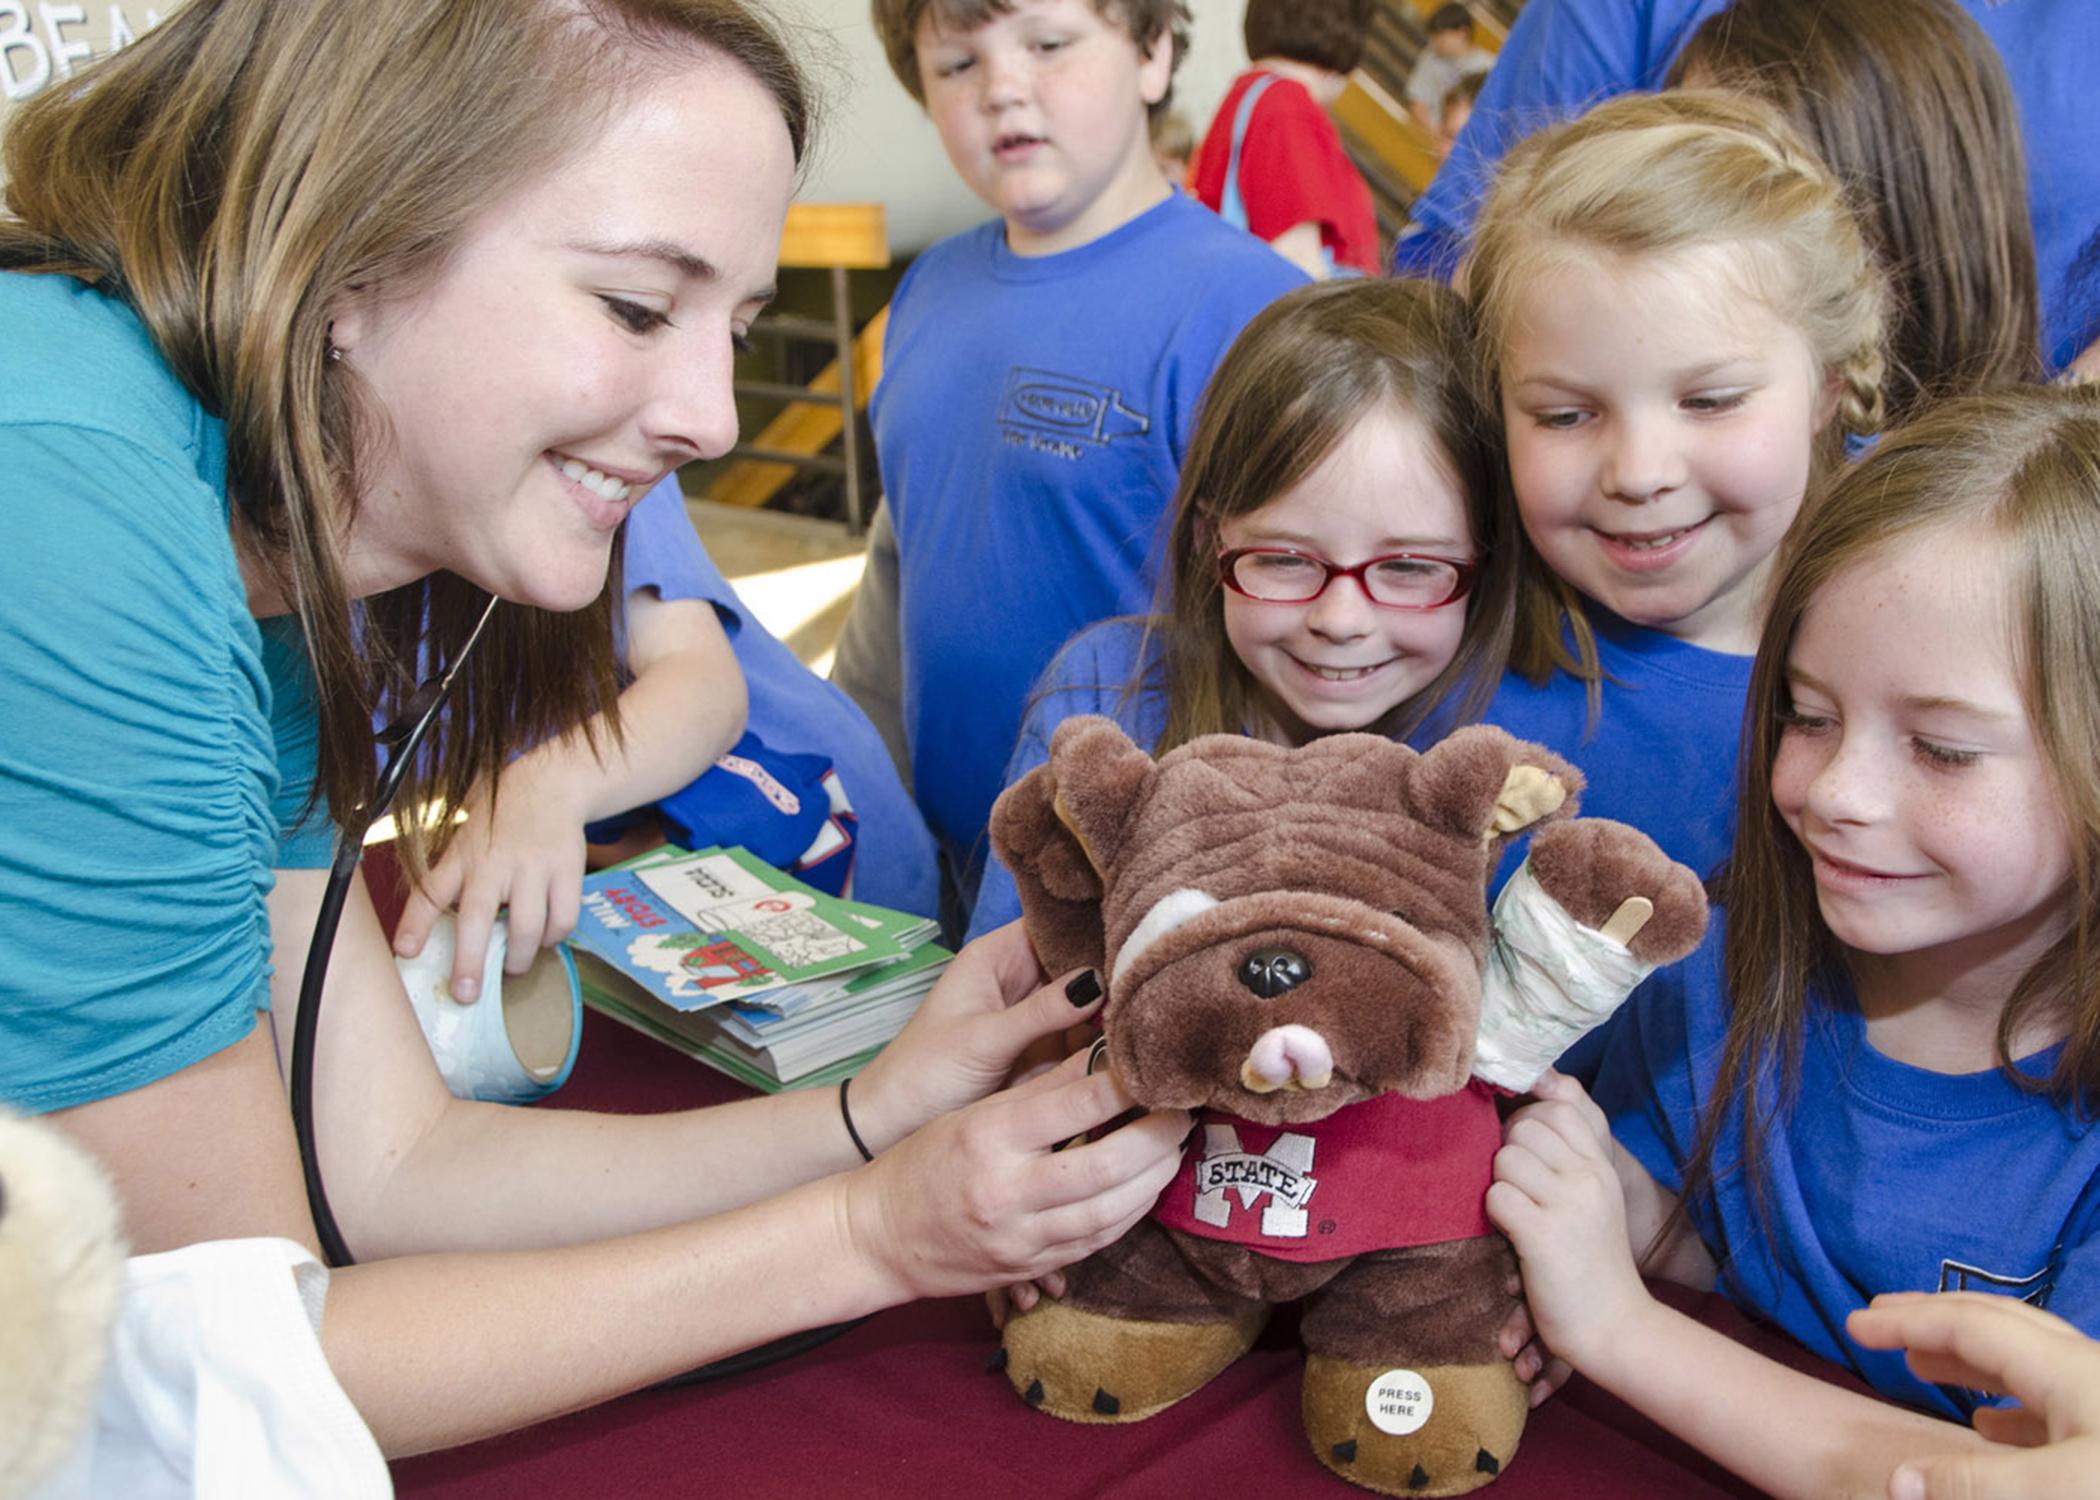 Children who attend the annual Mississippi State University College of Veterinary Medicine Open House get many opportunities to participate in hands-on activities and demonstrations. (Photo by MSU College of Veterinary Medicine/Tom Thompson)